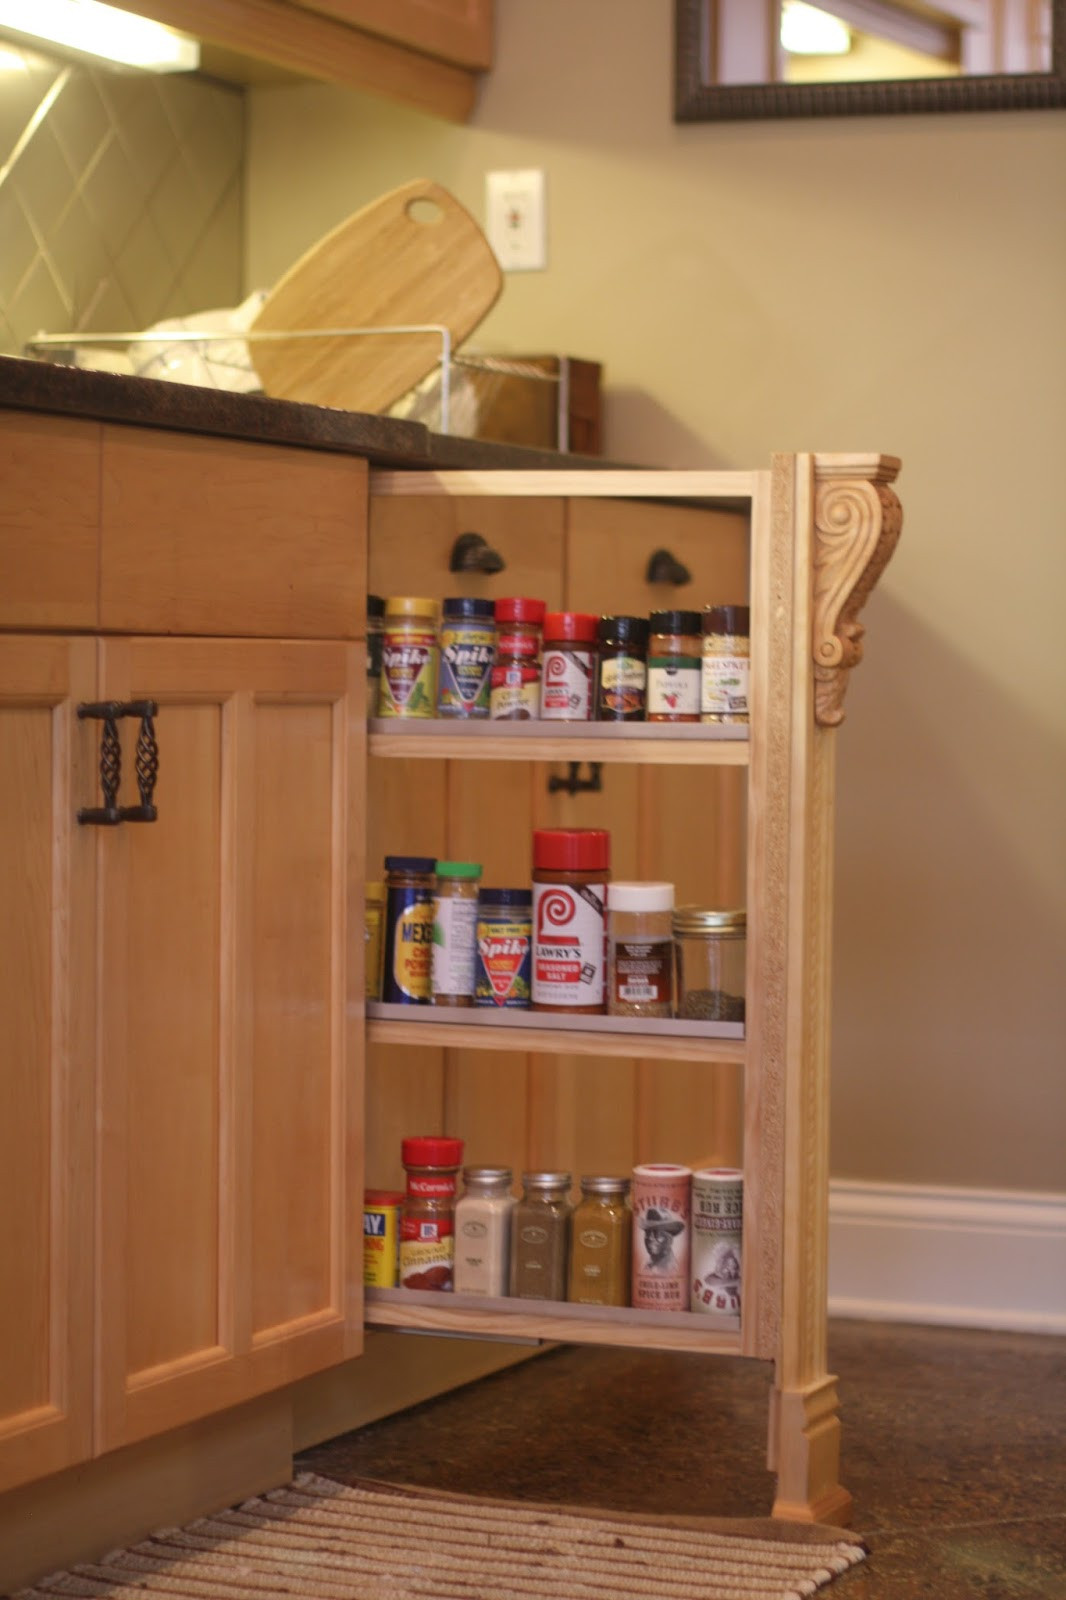 DIY Pull Out Spice Rack
 DIY Slide out Spice Rack pleted HandyHubby